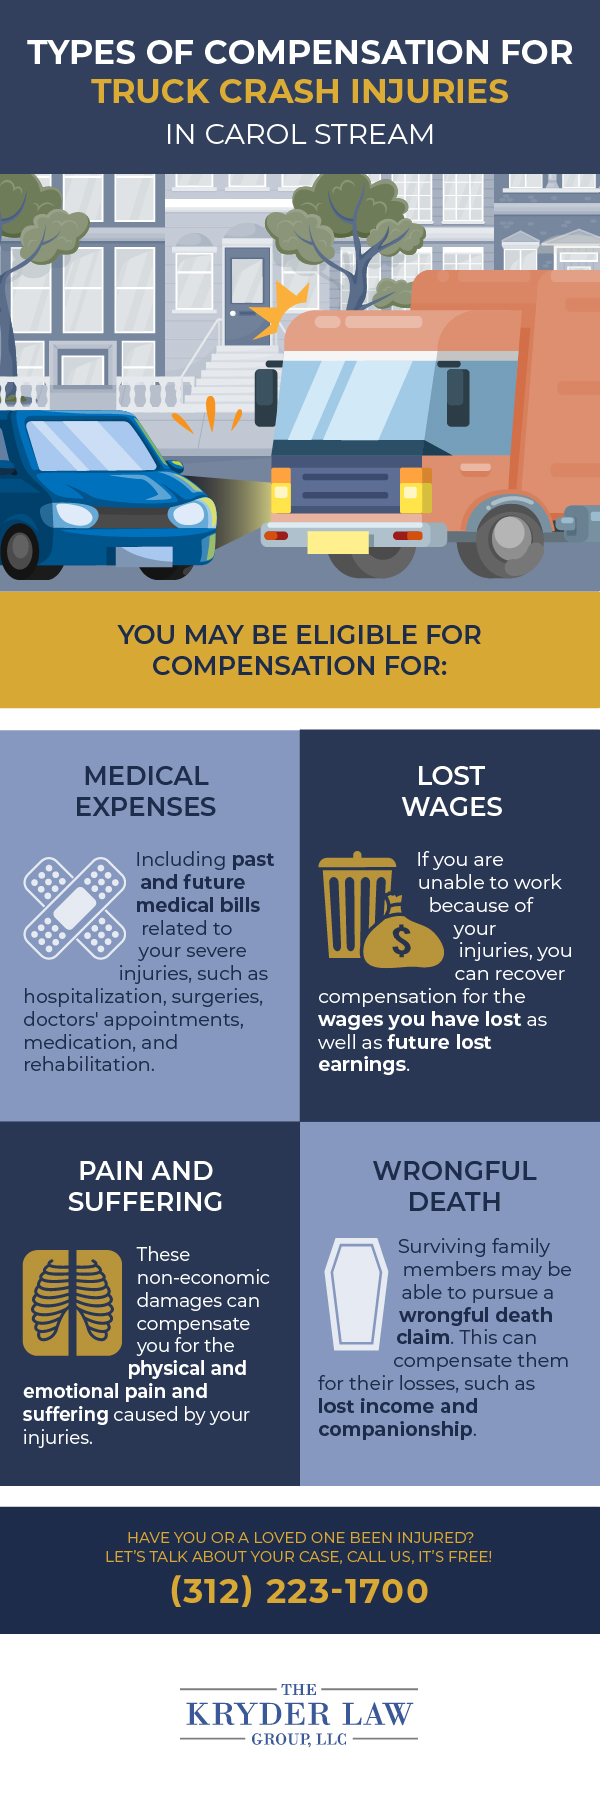 The Benefits of Hiring a Carol Stream Truck Accident Lawyer Infographic